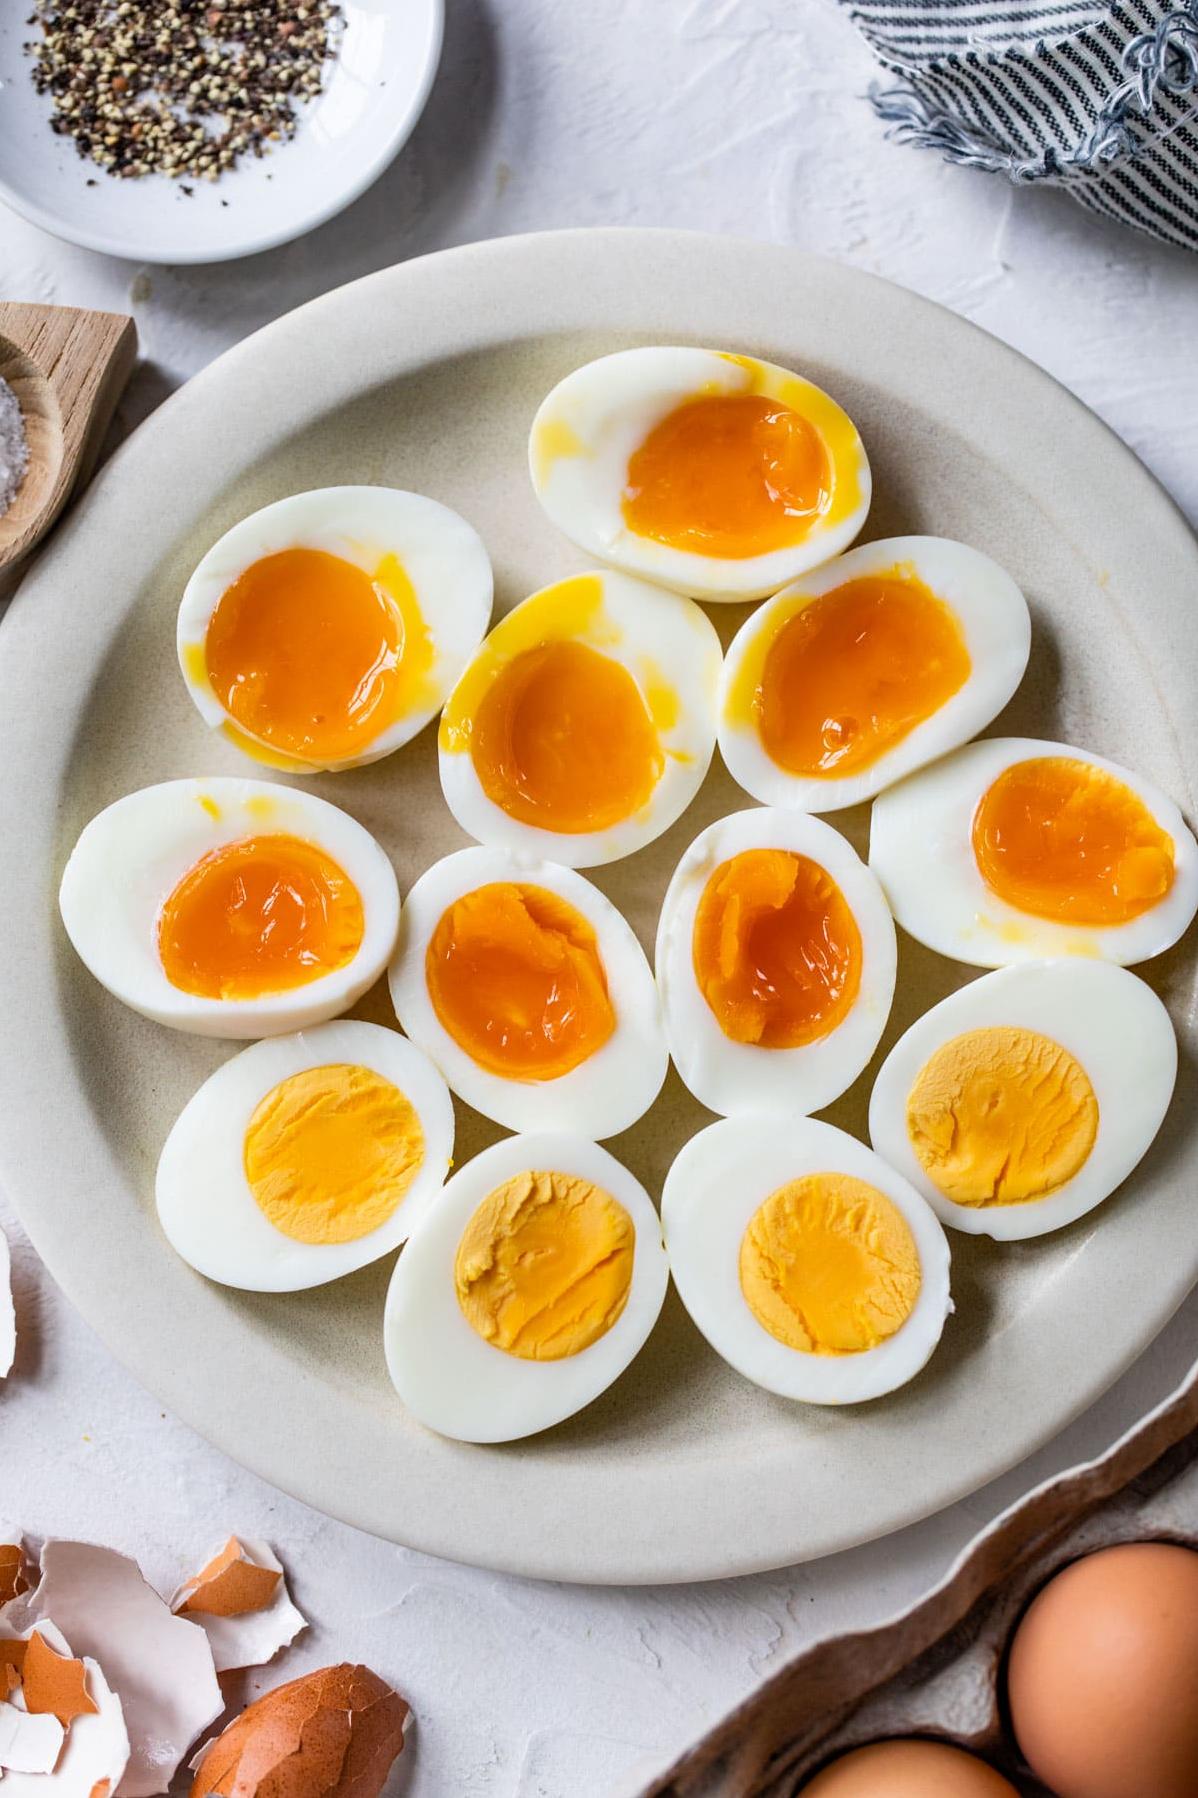  Take your egg game to the next level with this Instant Pot hack.